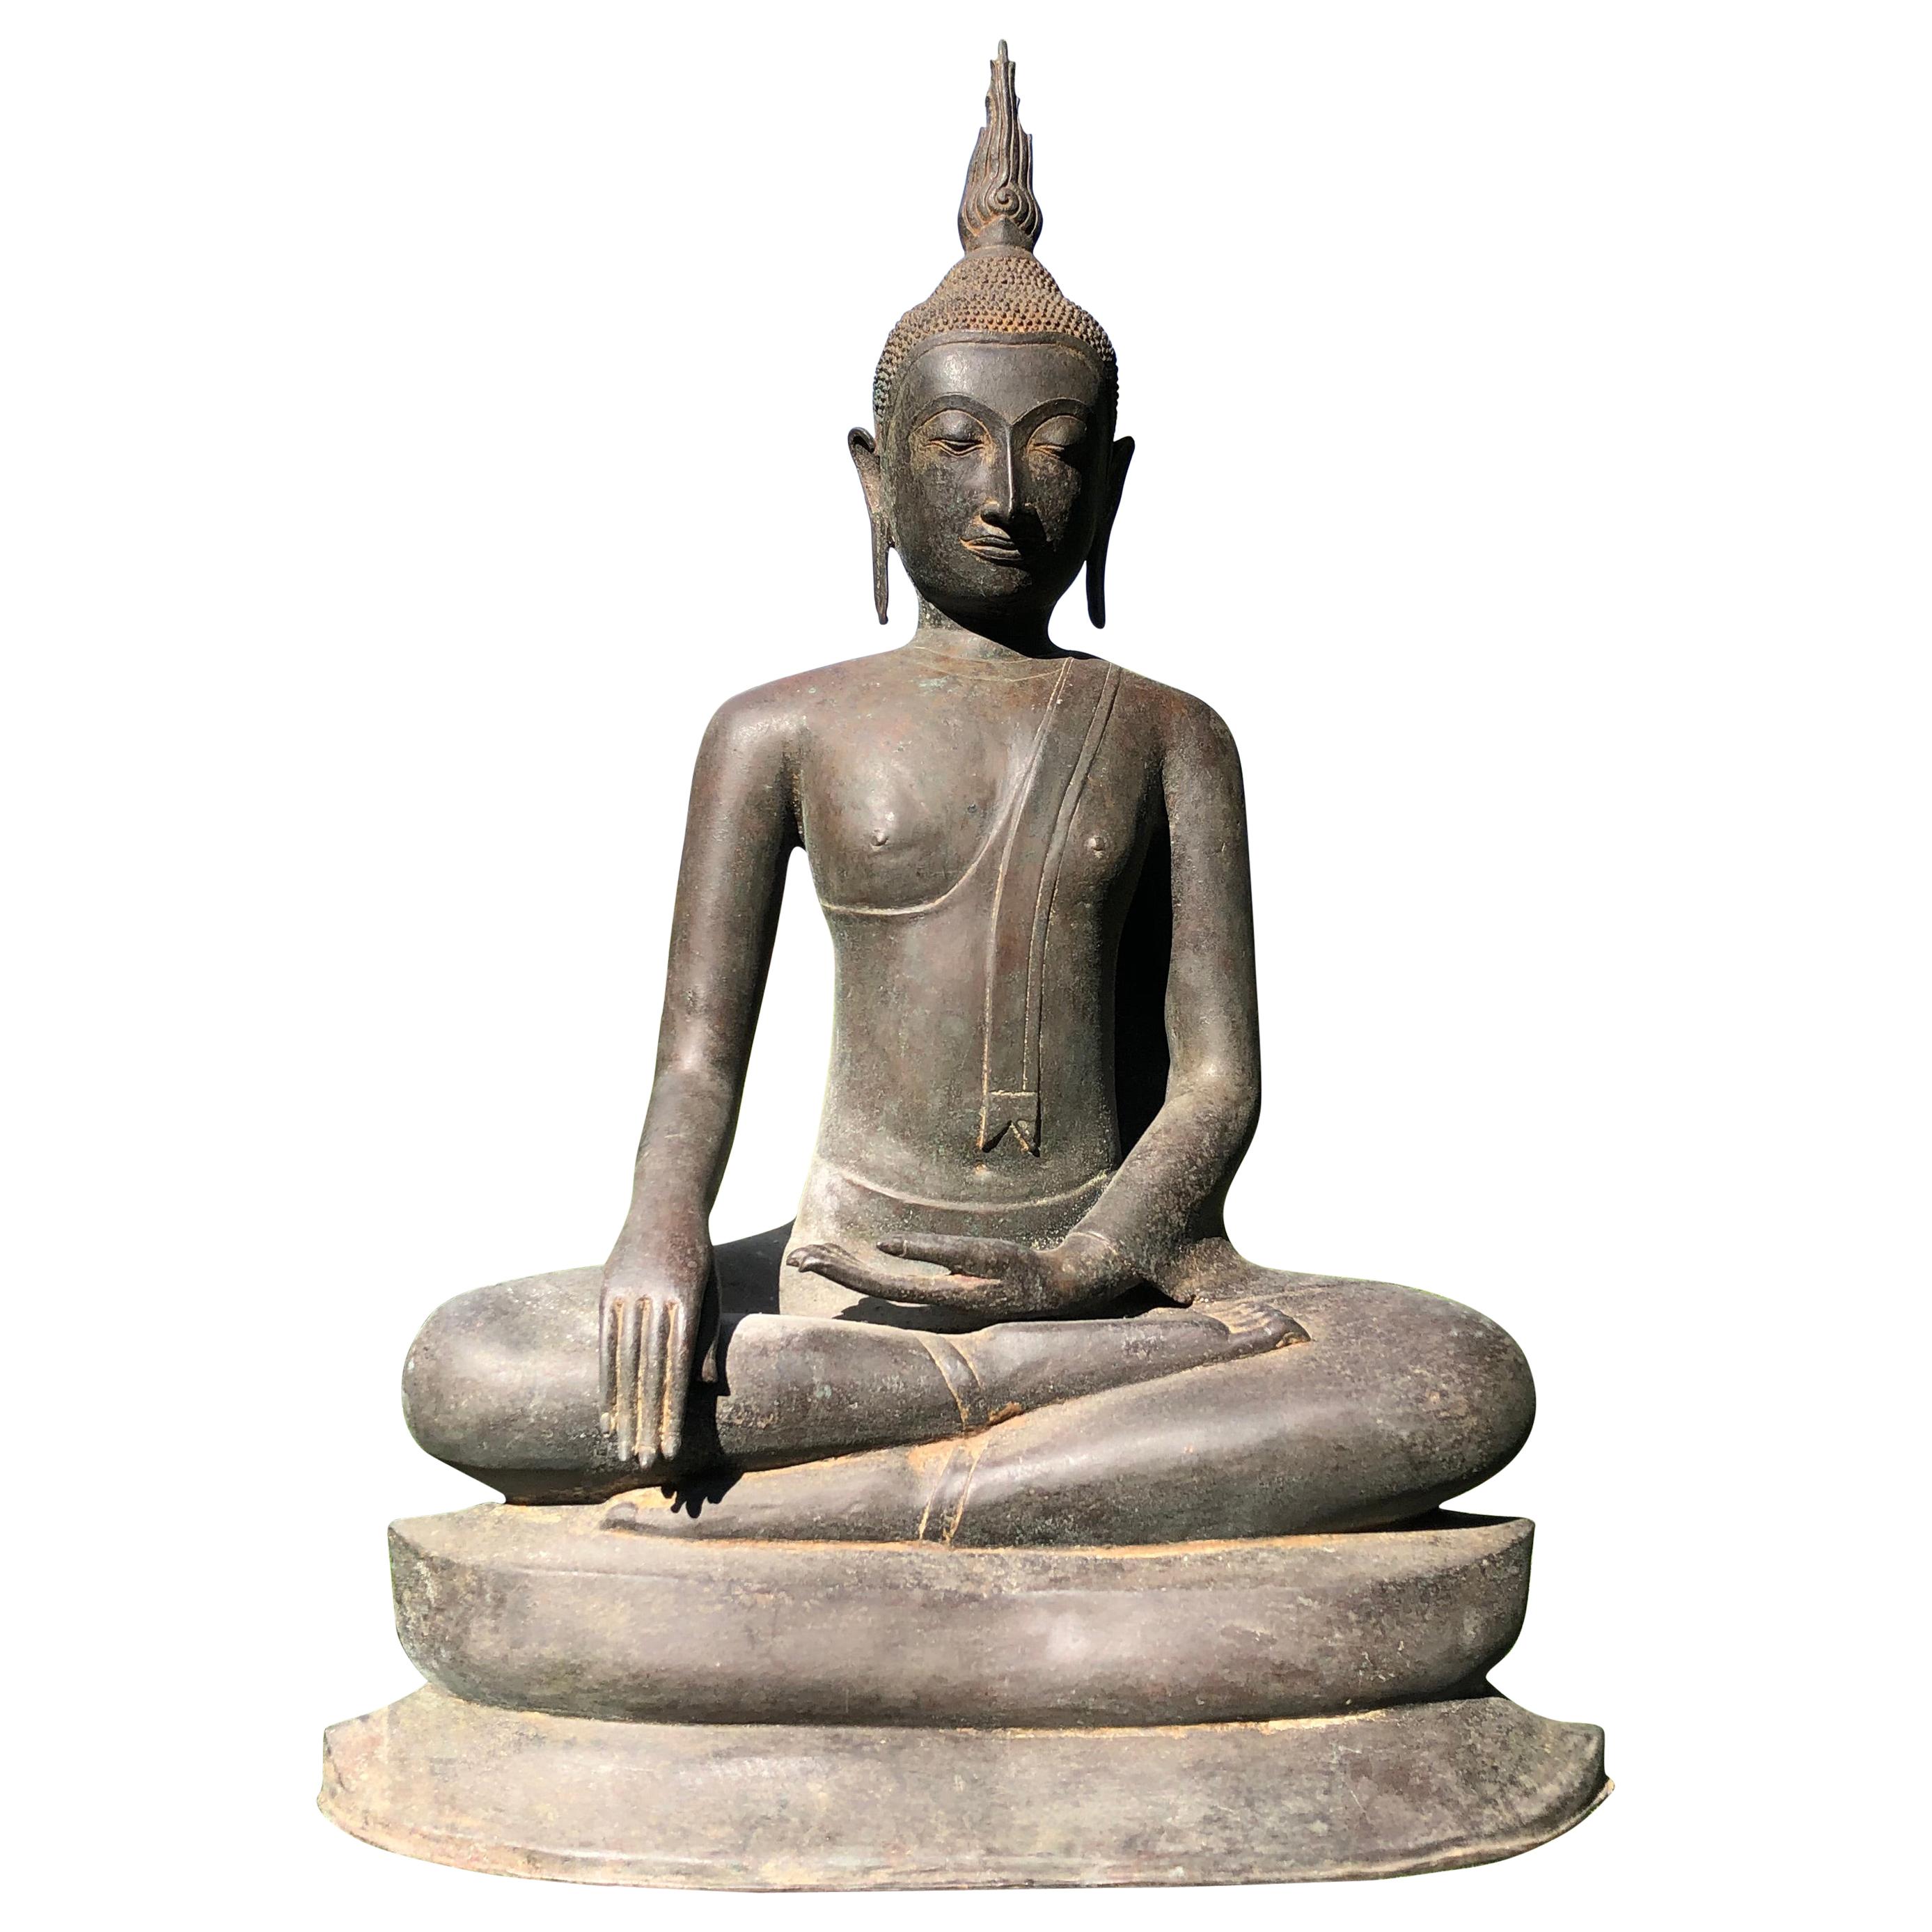 Monumental 33" Tall Bronze Serene Enlightenment Buddha, 19thc, Old UK Collection